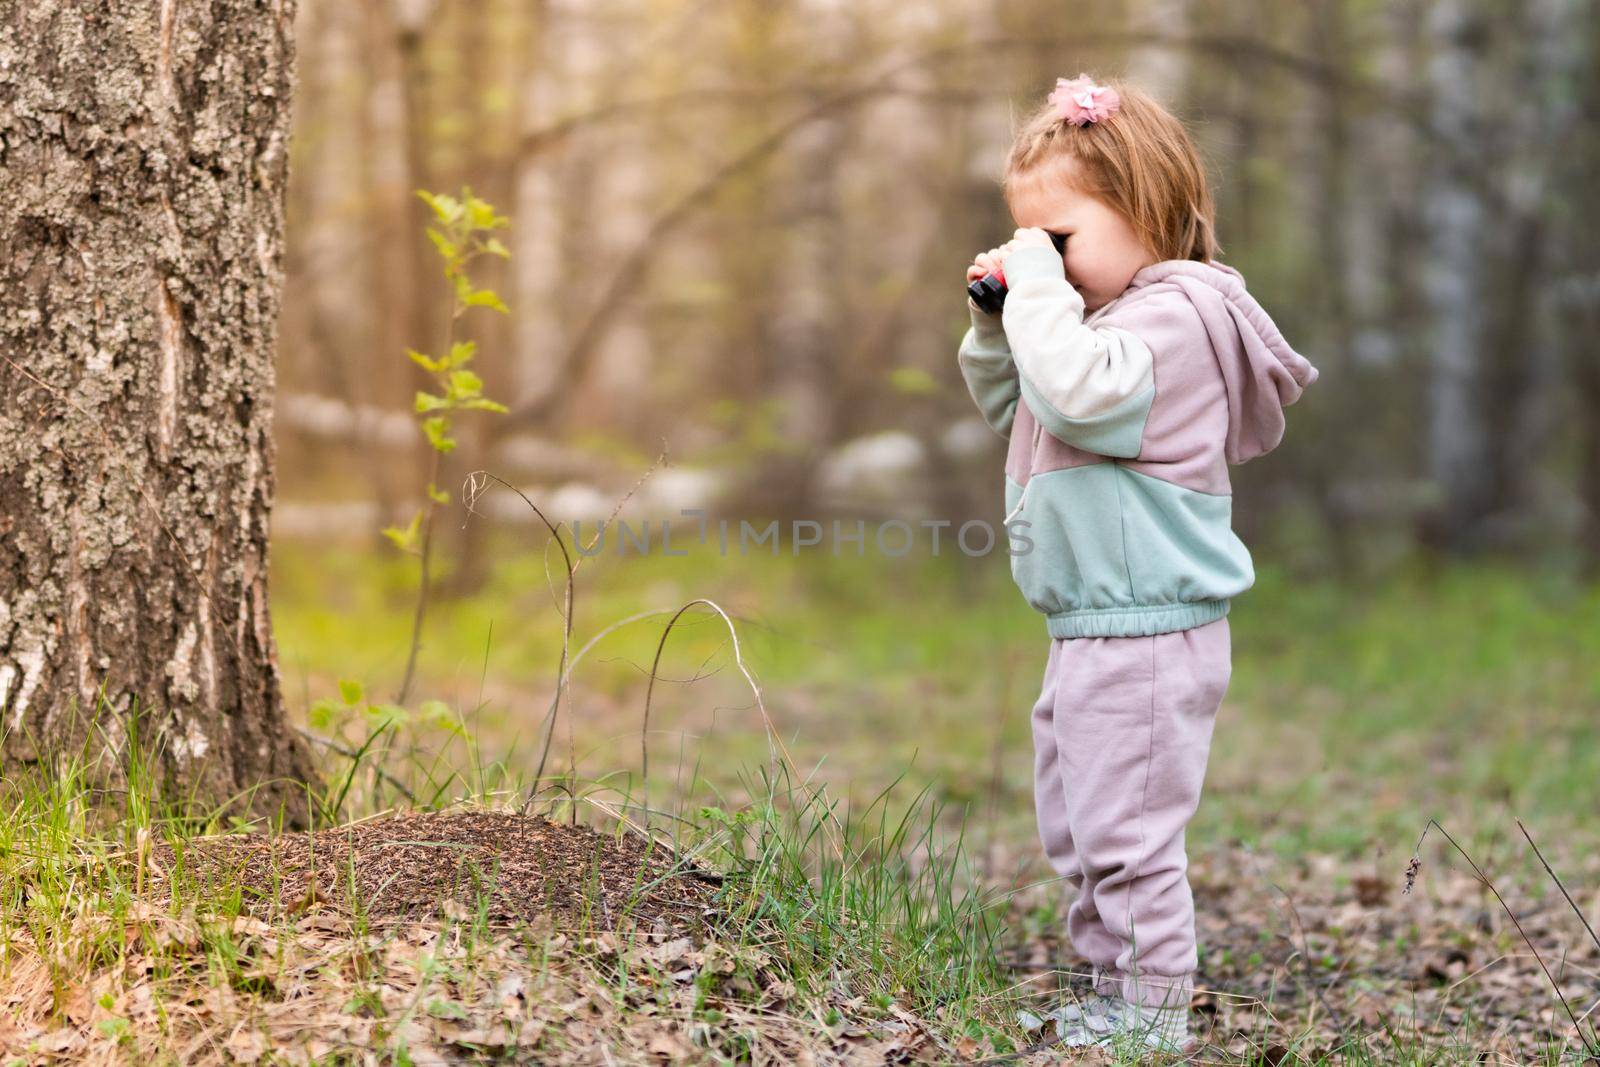 a girl in a birch grove has come up to an anthill and is watching ants with children's binoculars. She does not come close, so as not to disturb the insects. she is very interested in the world of small living creatures